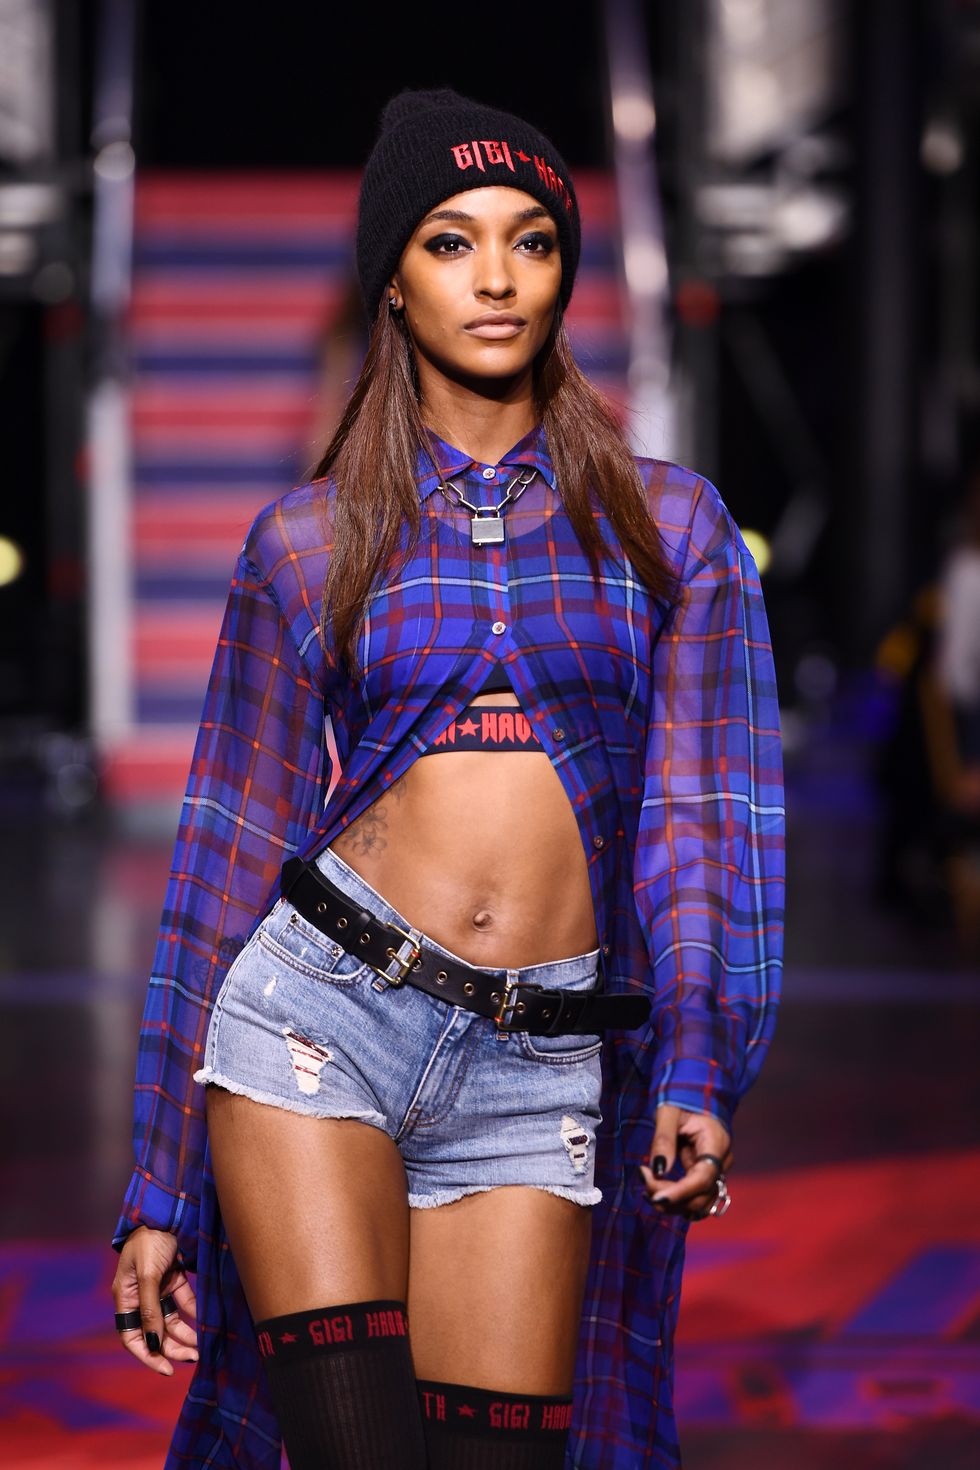 LONDON, ENGLAND - SEPTEMBER 19: Jourdan Dunn walks the runway at the Tommy Hilfiger TOMMYNOW Fall 2017 Show during London Fashion Week September 2017 at the Roundhouse on September 19, 2017 in London, England.  (Photo by Ian Gavan/Getty Images for Tommy Hilfiger)